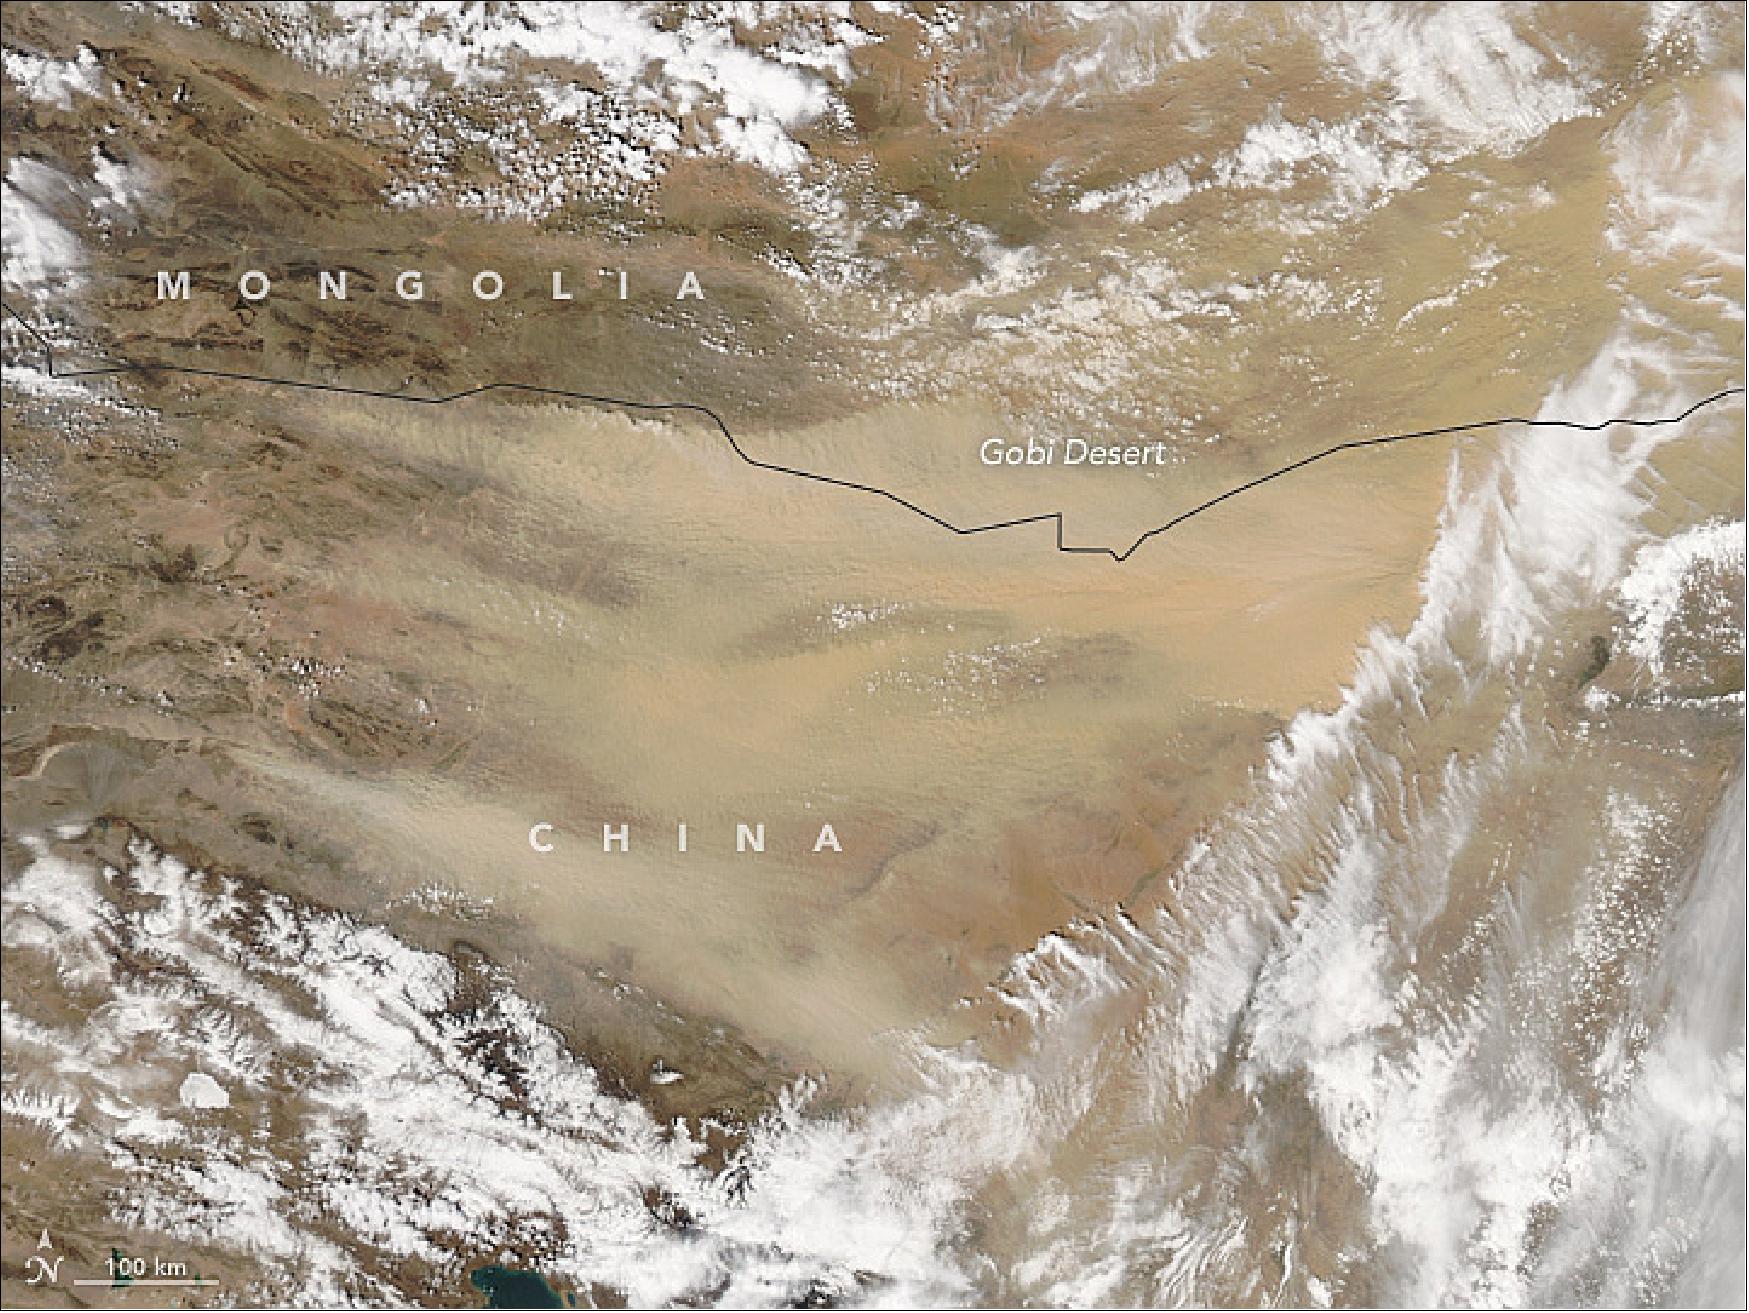 Figure 105: MODIS image of a major dust storm in northern China acquired on May 3, 2017 (image credit: NASA Earth Observatory, image by Jeff Schmaltz, caption by Adam Voiland)